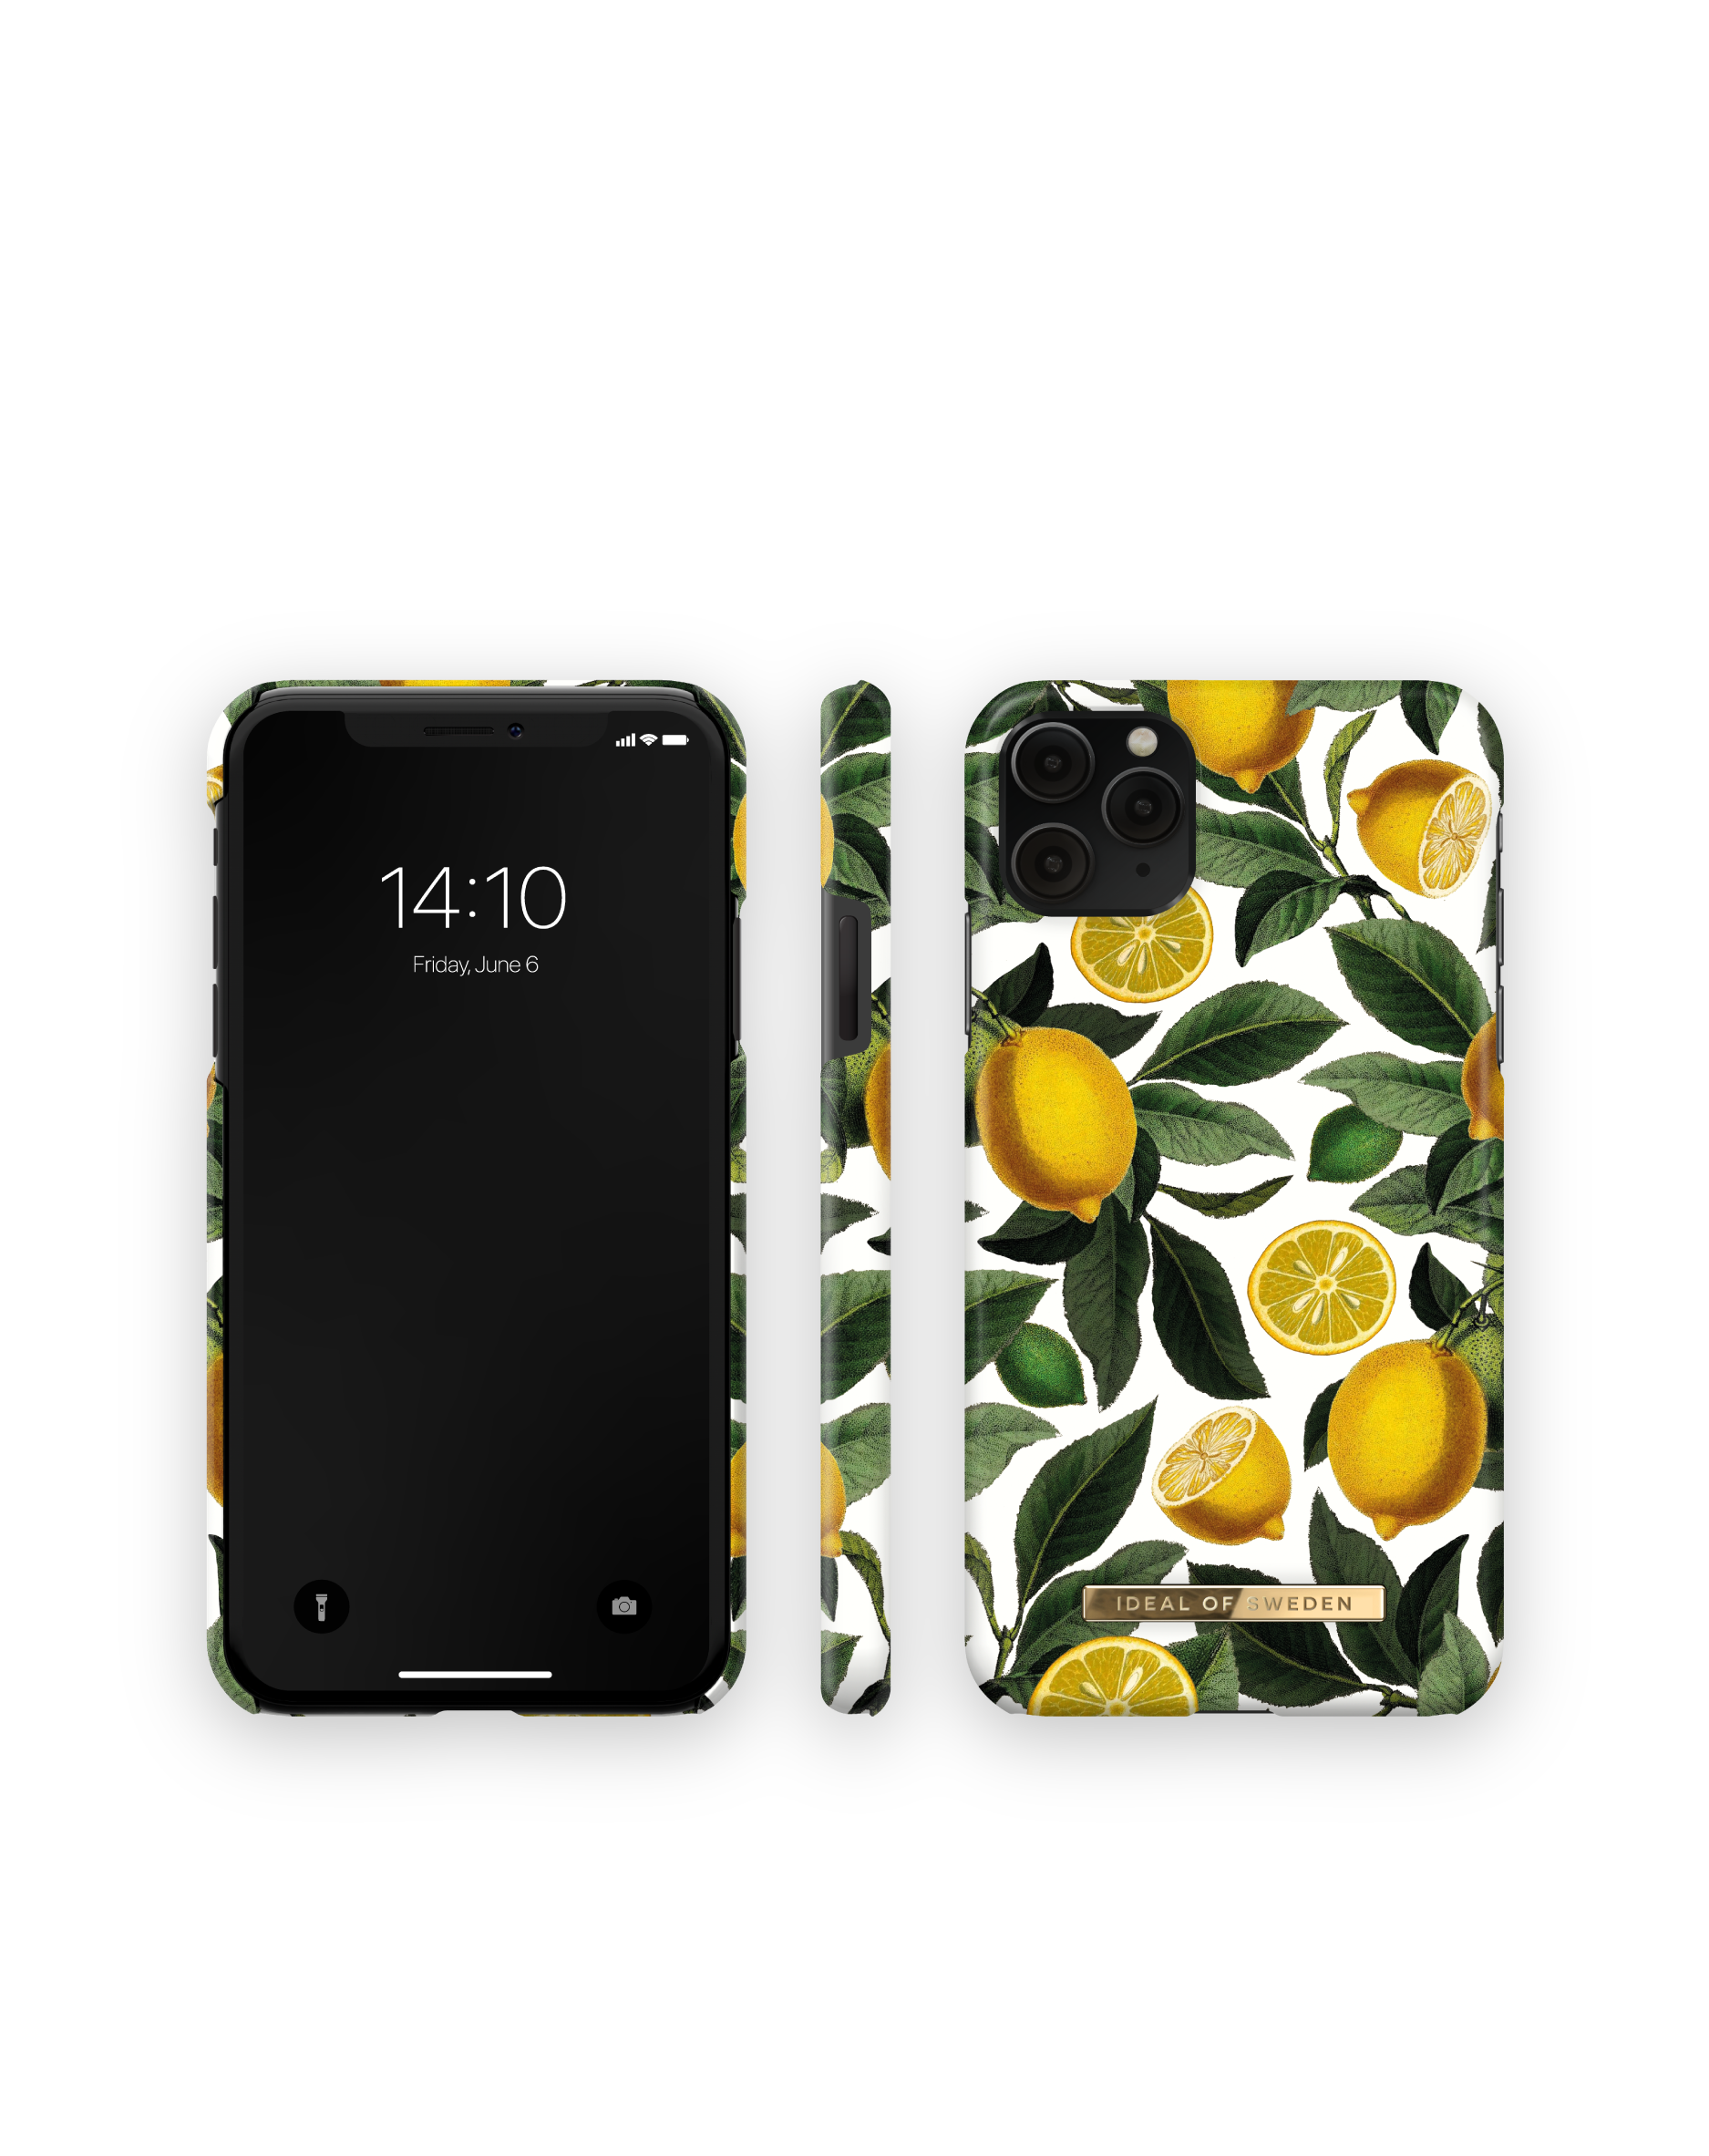 IDFCSS20-I1965-196, Apple, Apple Pro OF XS iPhone Apple IDEAL iPhone Bliss Backcover, SWEDEN 11 Max, Max, Lemon